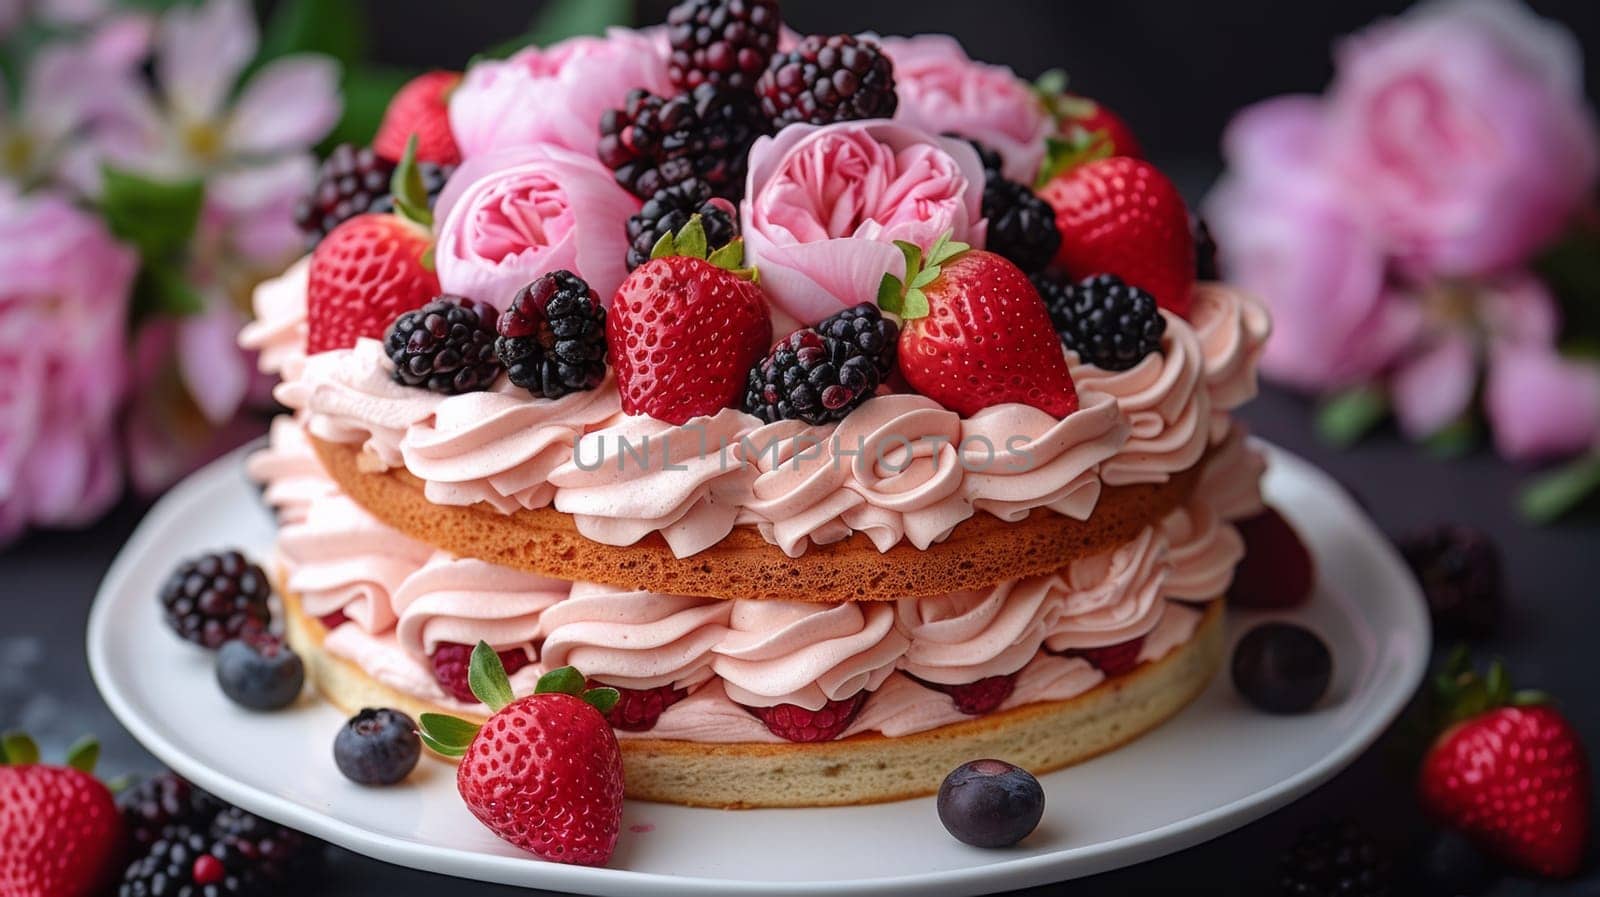 A close up of a cake with berries and cream on top, AI by starush